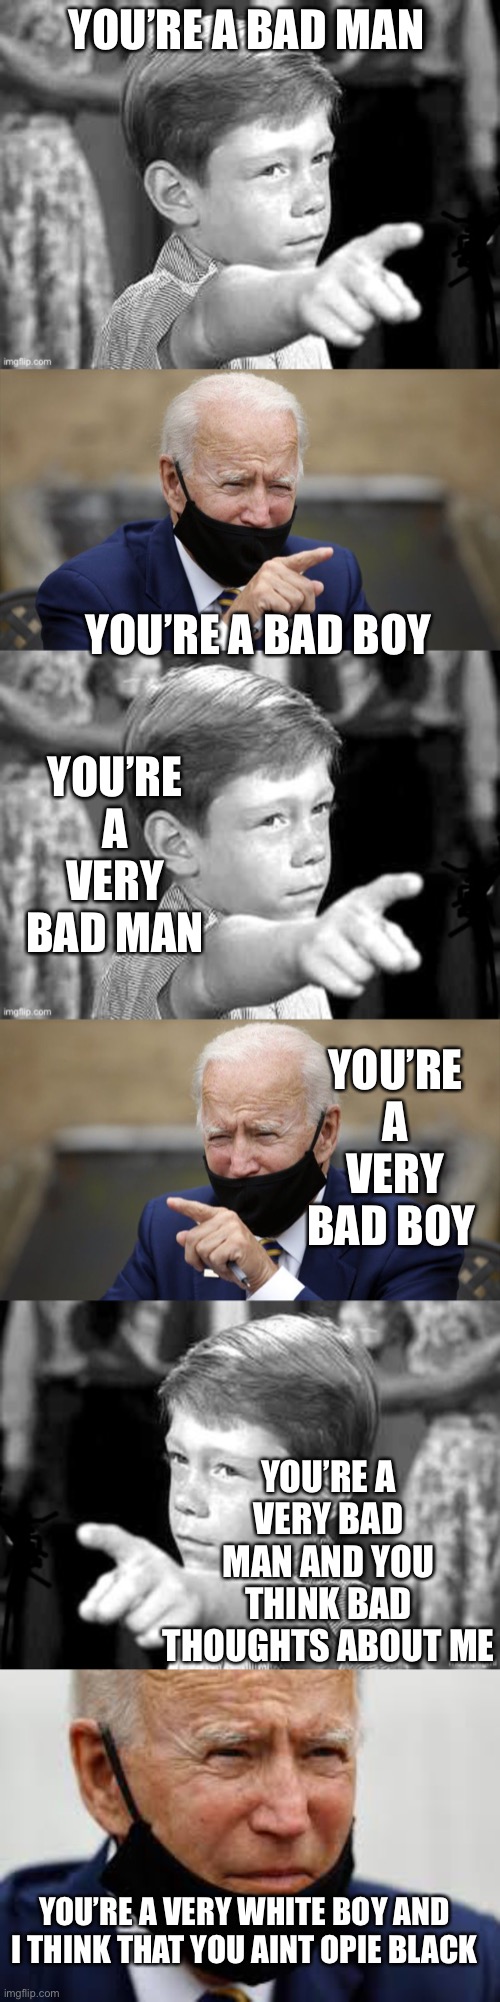 Joe Meets His Future | YOU’RE A BAD MAN; YOU’RE A BAD BOY; YOU’RE A VERY BAD MAN; YOU’RE A VERY BAD BOY; YOU’RE A VERY BAD MAN AND YOU THINK BAD THOUGHTS ABOUT ME; YOU’RE A VERY WHITE BOY AND I THINK THAT YOU AINT OPIE BLACK | image tagged in thony corn,schmo joe ho bin biden,schmo buyed in,mtr602,macith | made w/ Imgflip meme maker